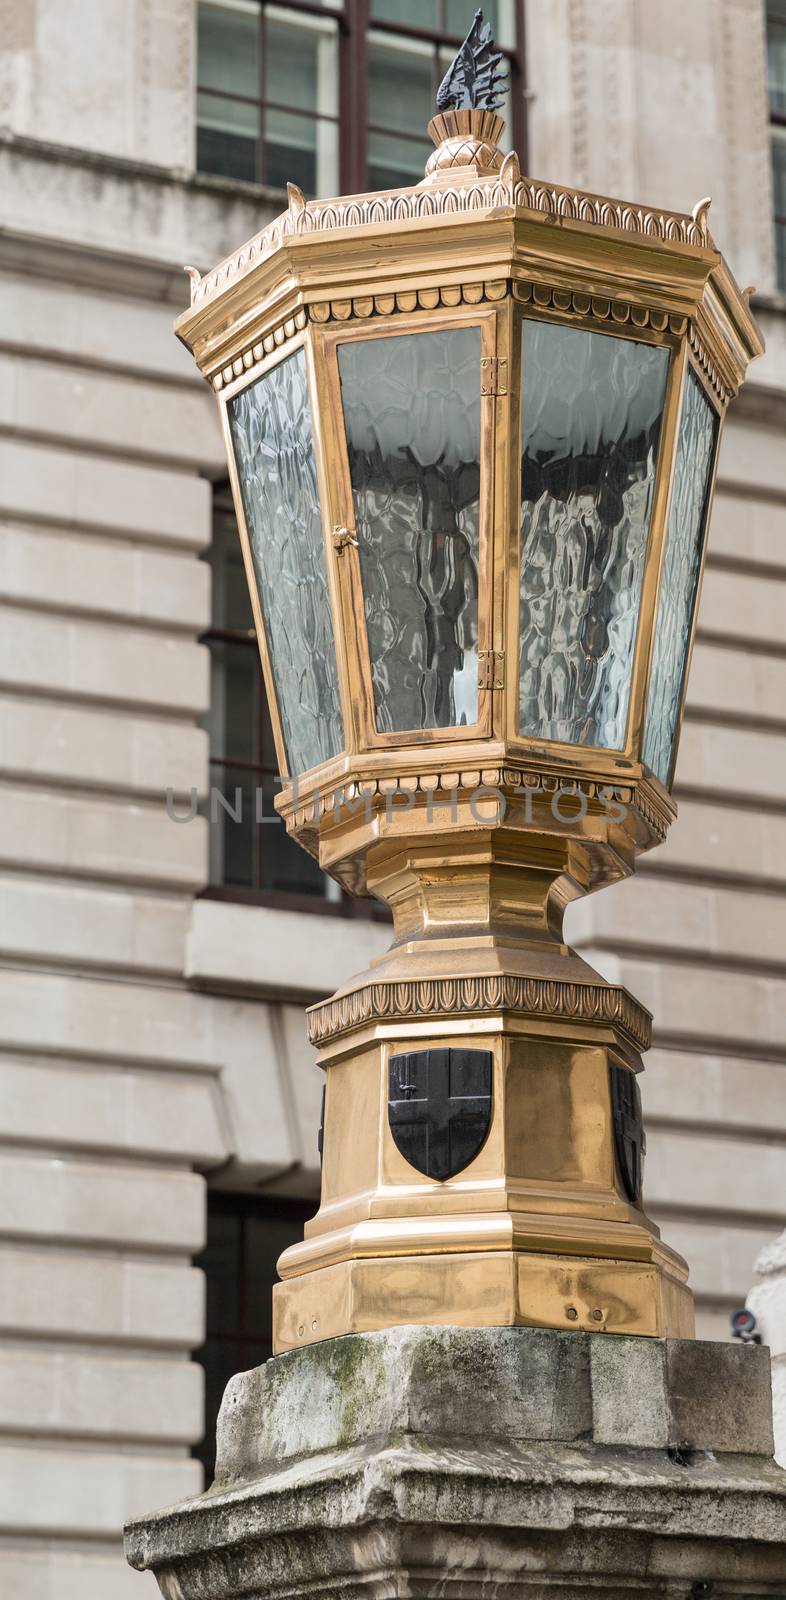 Old Lamp in the City of London - originally a gas lamp